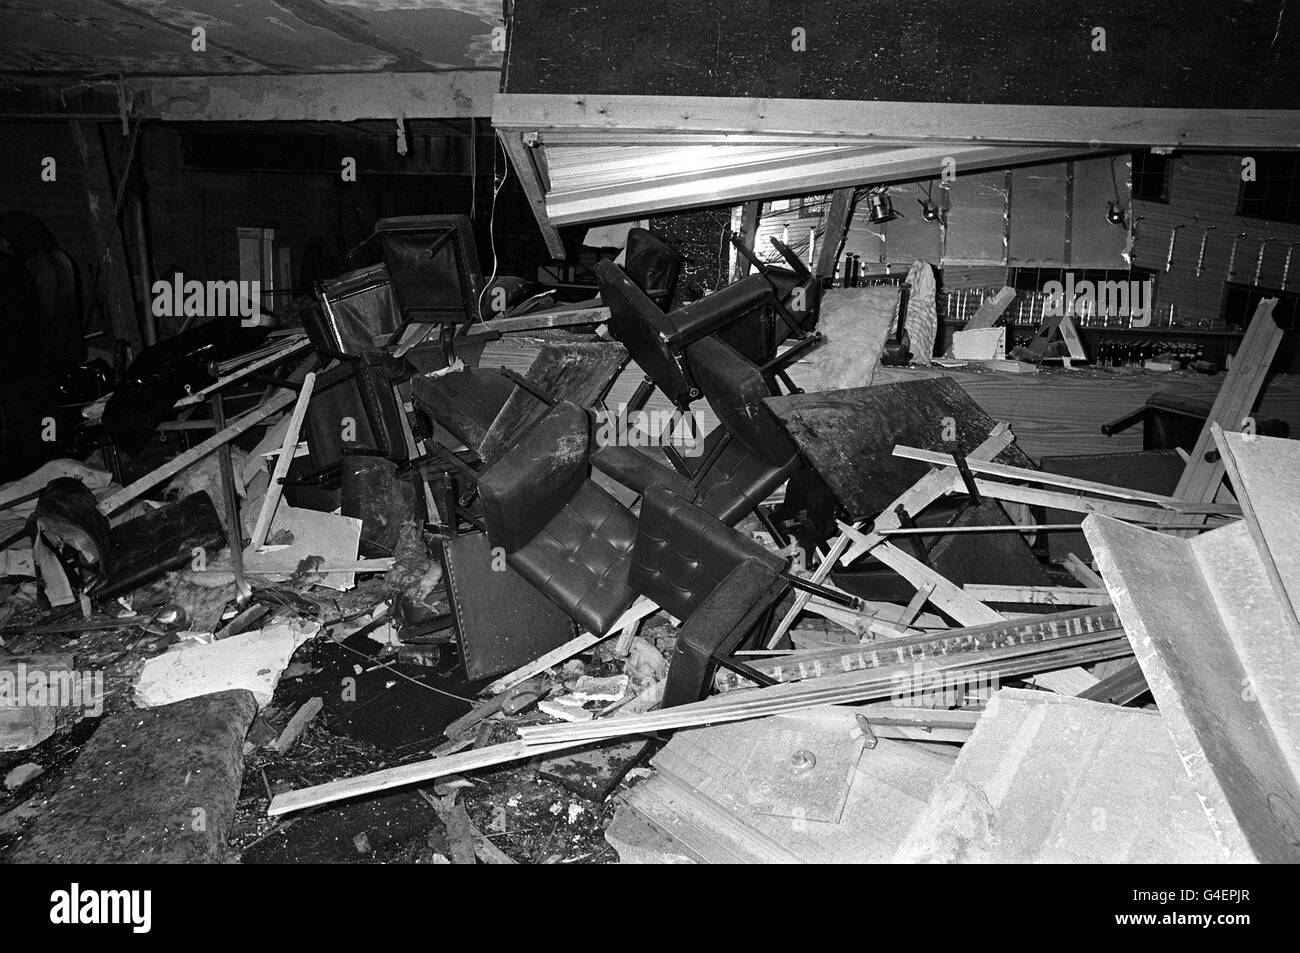 PA NEWS PHOTO 7/12/82  THE SCENE OF THE BOMB DEVASTATION AT THE 'DROPPIN WELL' PUB-DISCO IN BALLYKELLY, LONDONDERRY, IRELAND Stock Photo